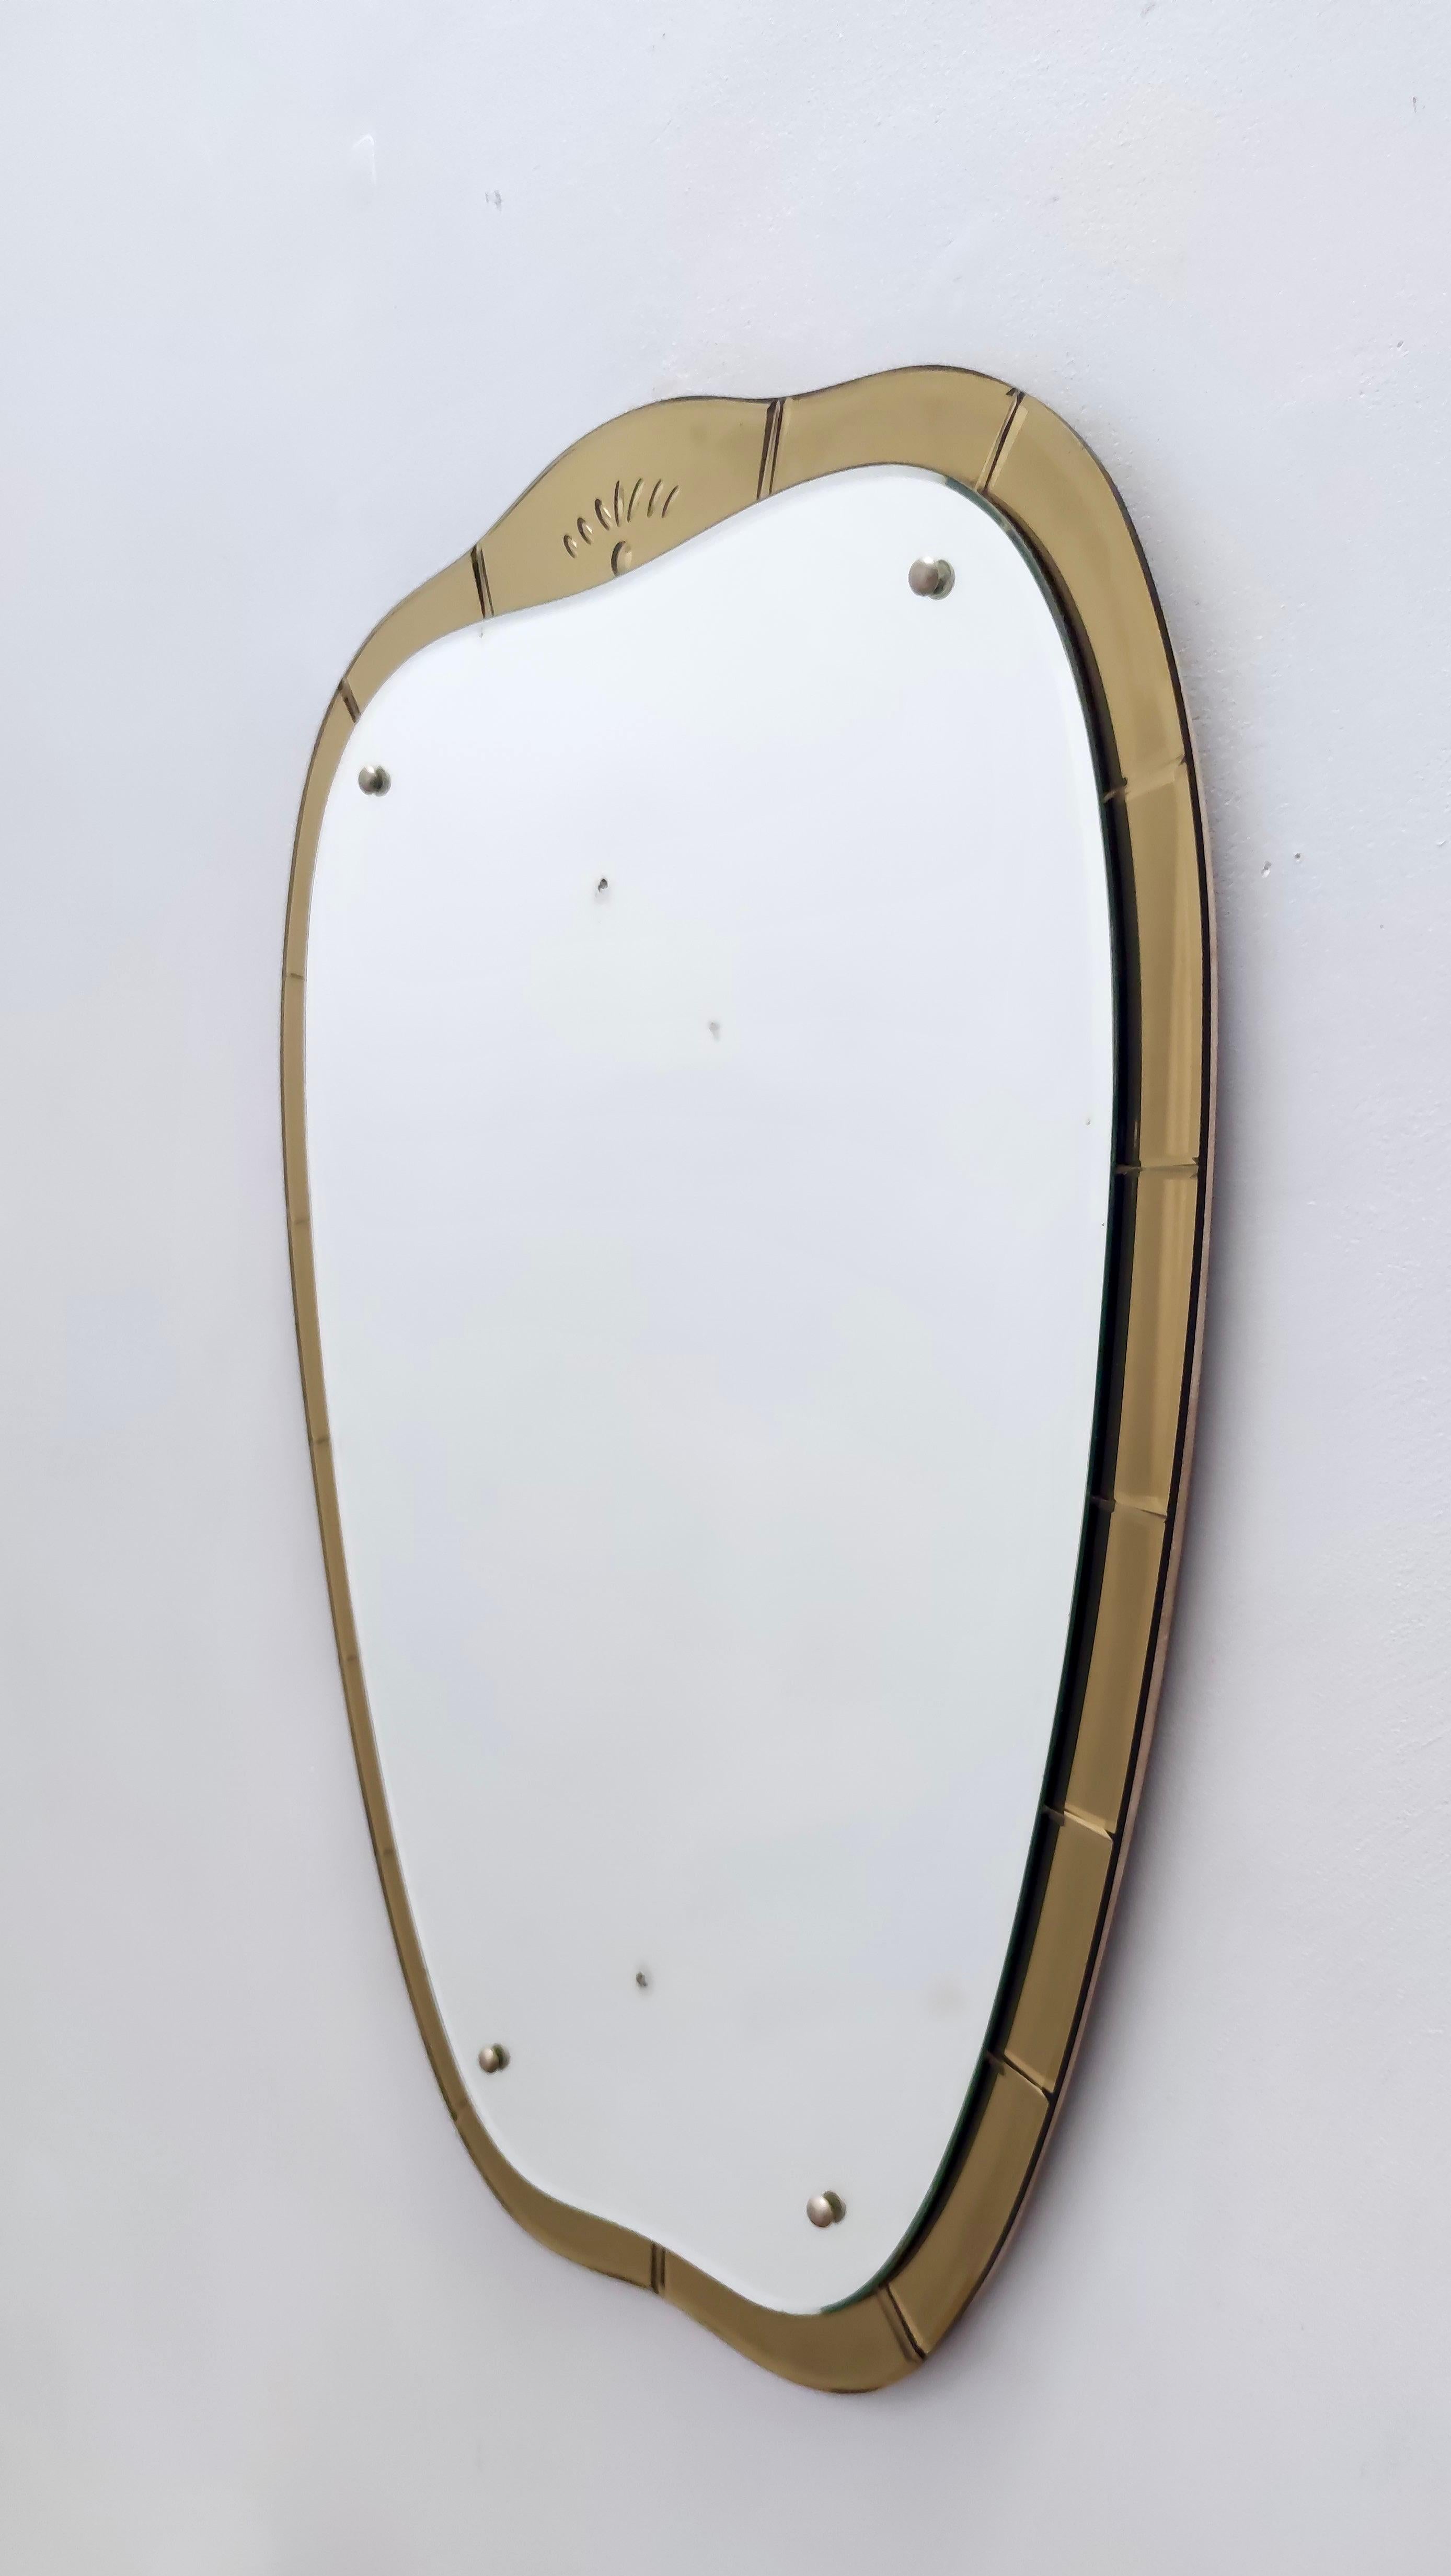 Mid-20th Century Vintage Shield Mirror in the style of Fontana Arte with a Golden Frame, Italy For Sale